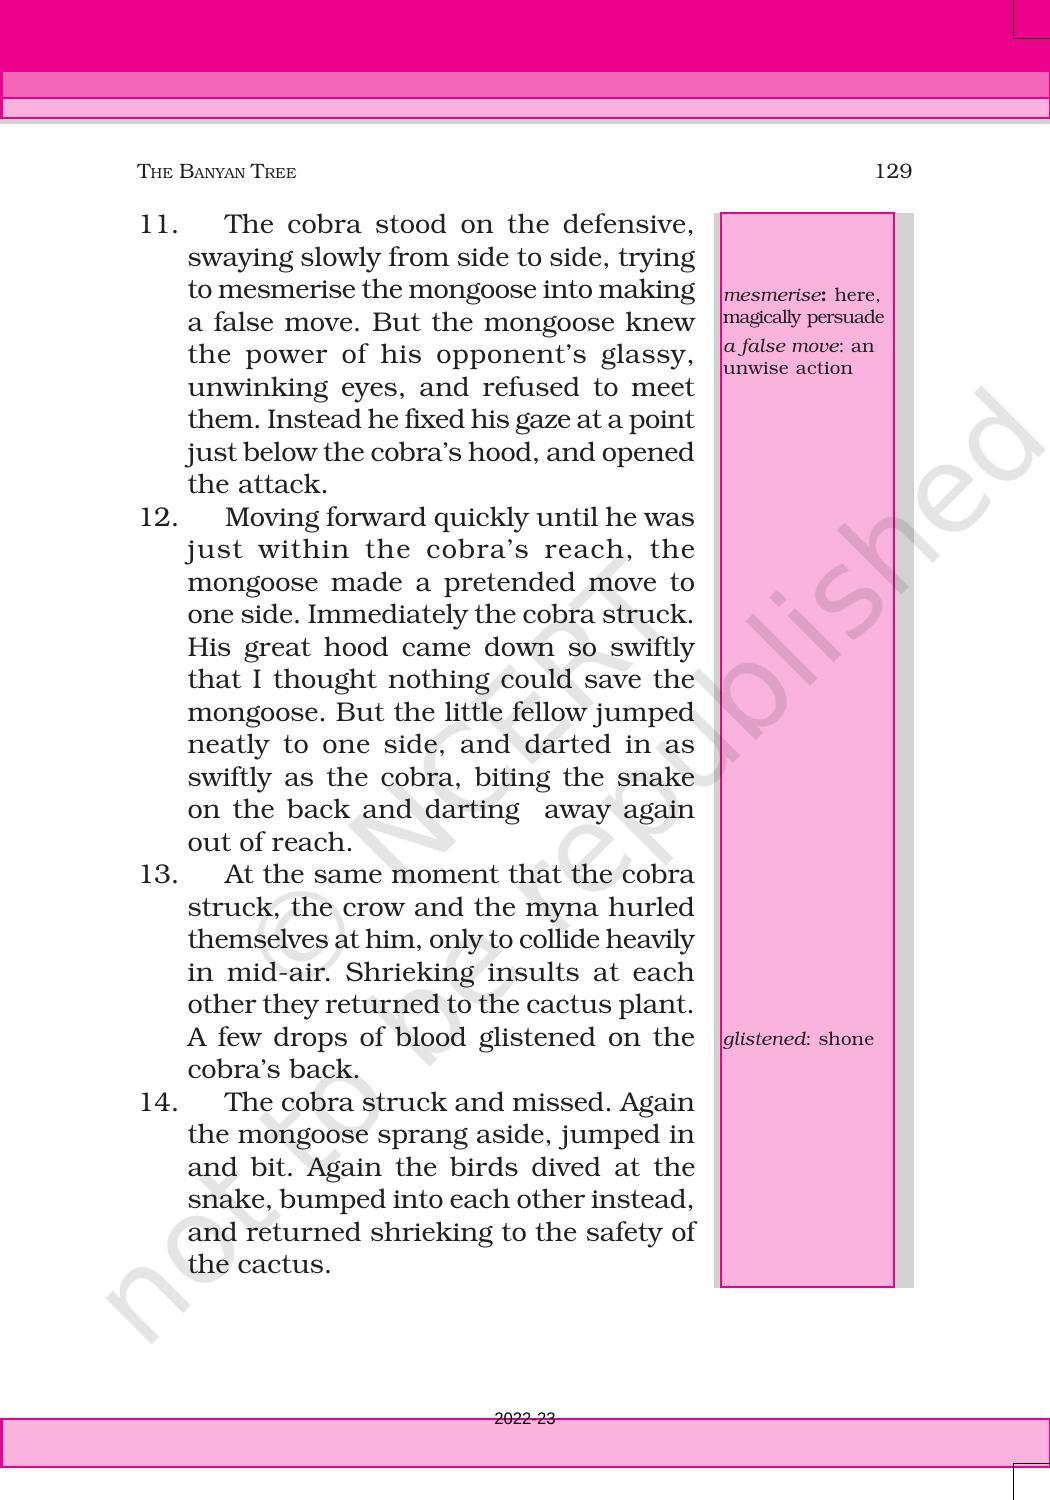 NCERT Book for Class 6 English(Honeysuckle) : Chapter 10-The Banyan Tree - Page 6